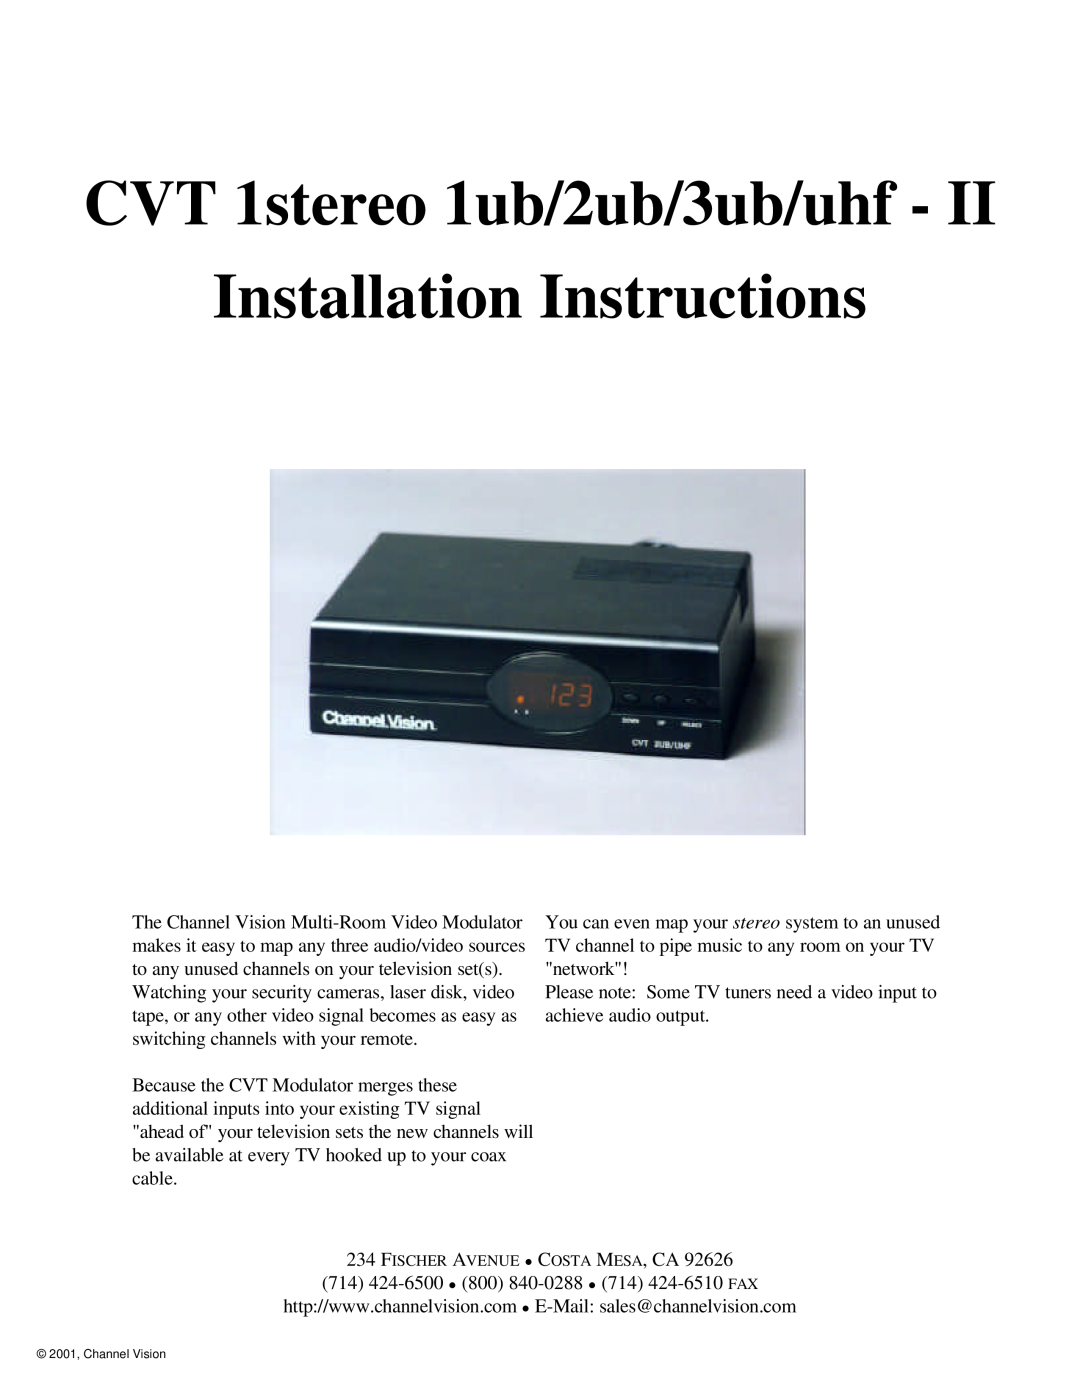 Channel Vision Stereo Receiver installation instructions CVT 1stereo 1ub/2ub/3ub/uhf, Installation Instructions 